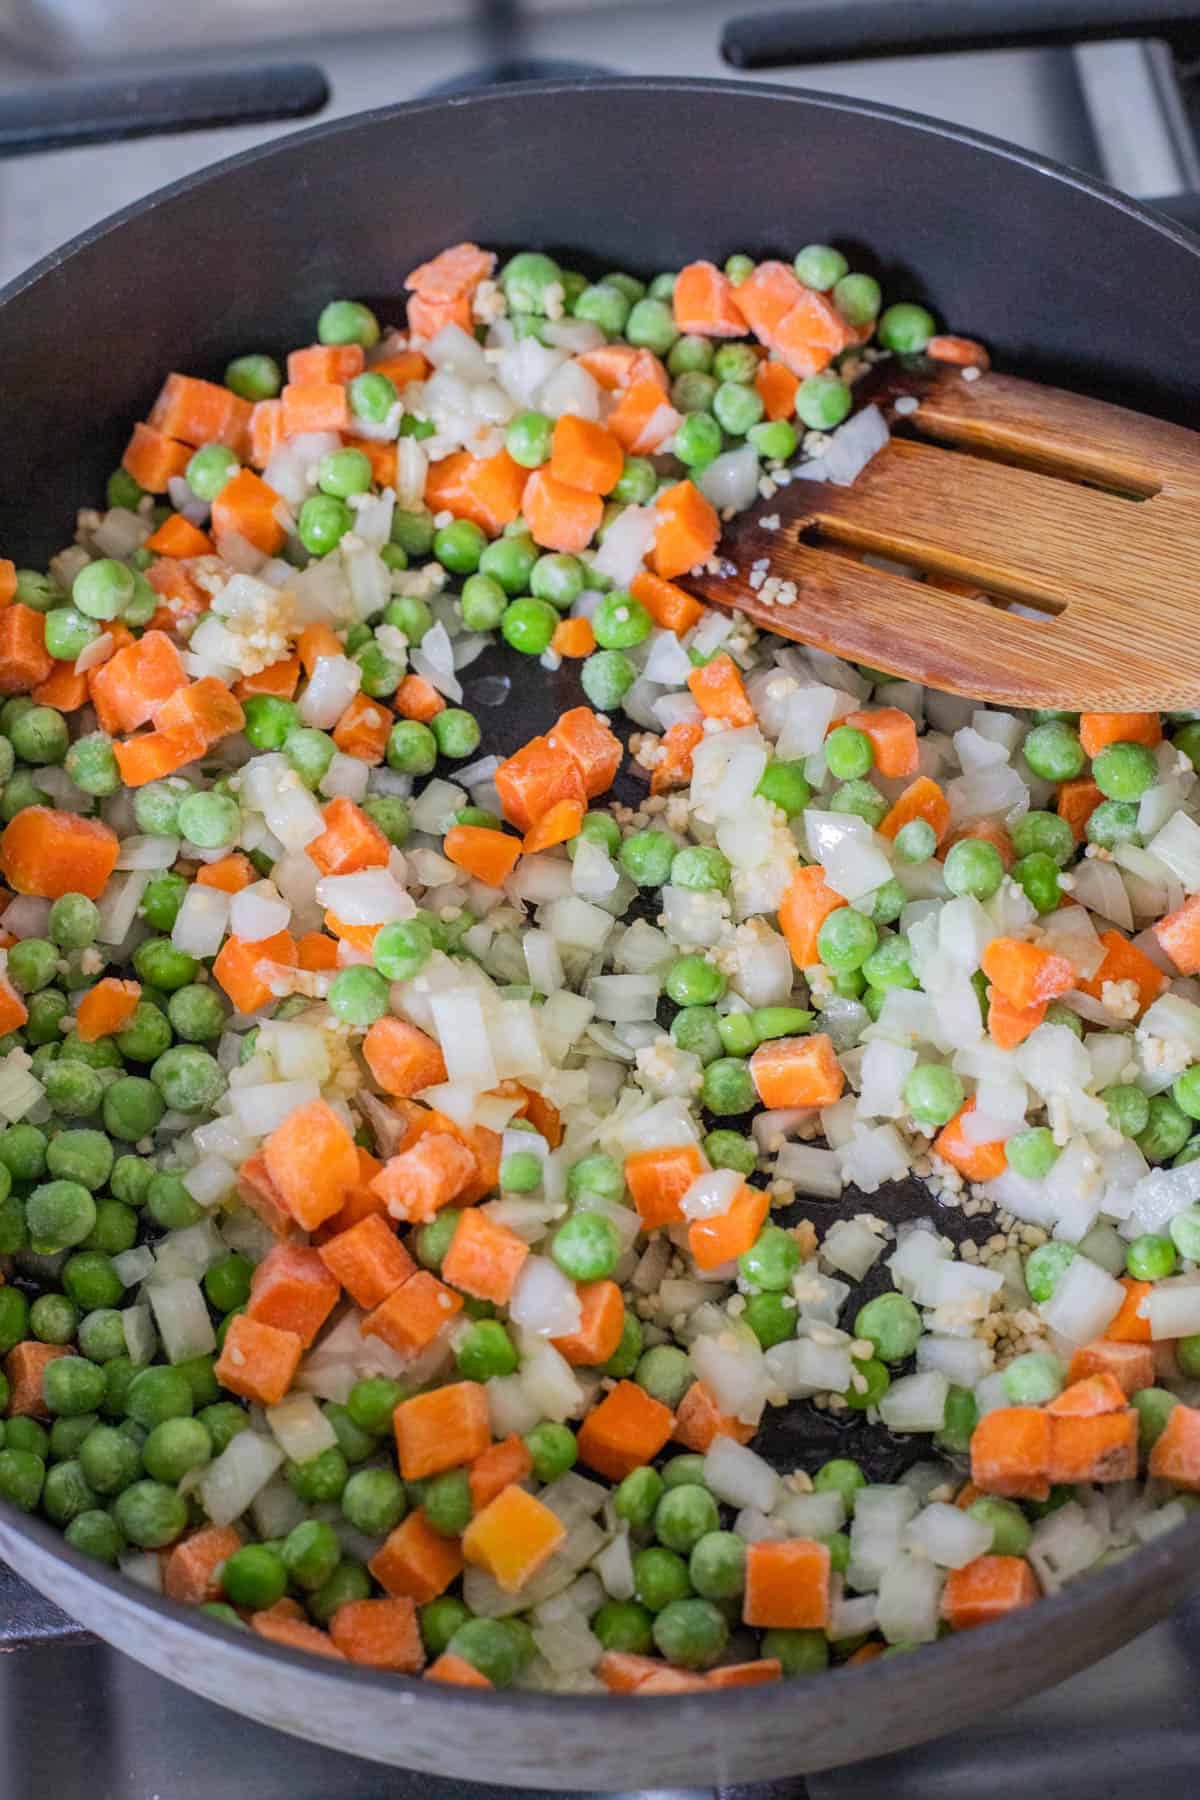 Carrots, peas, and onions in a frying pan.